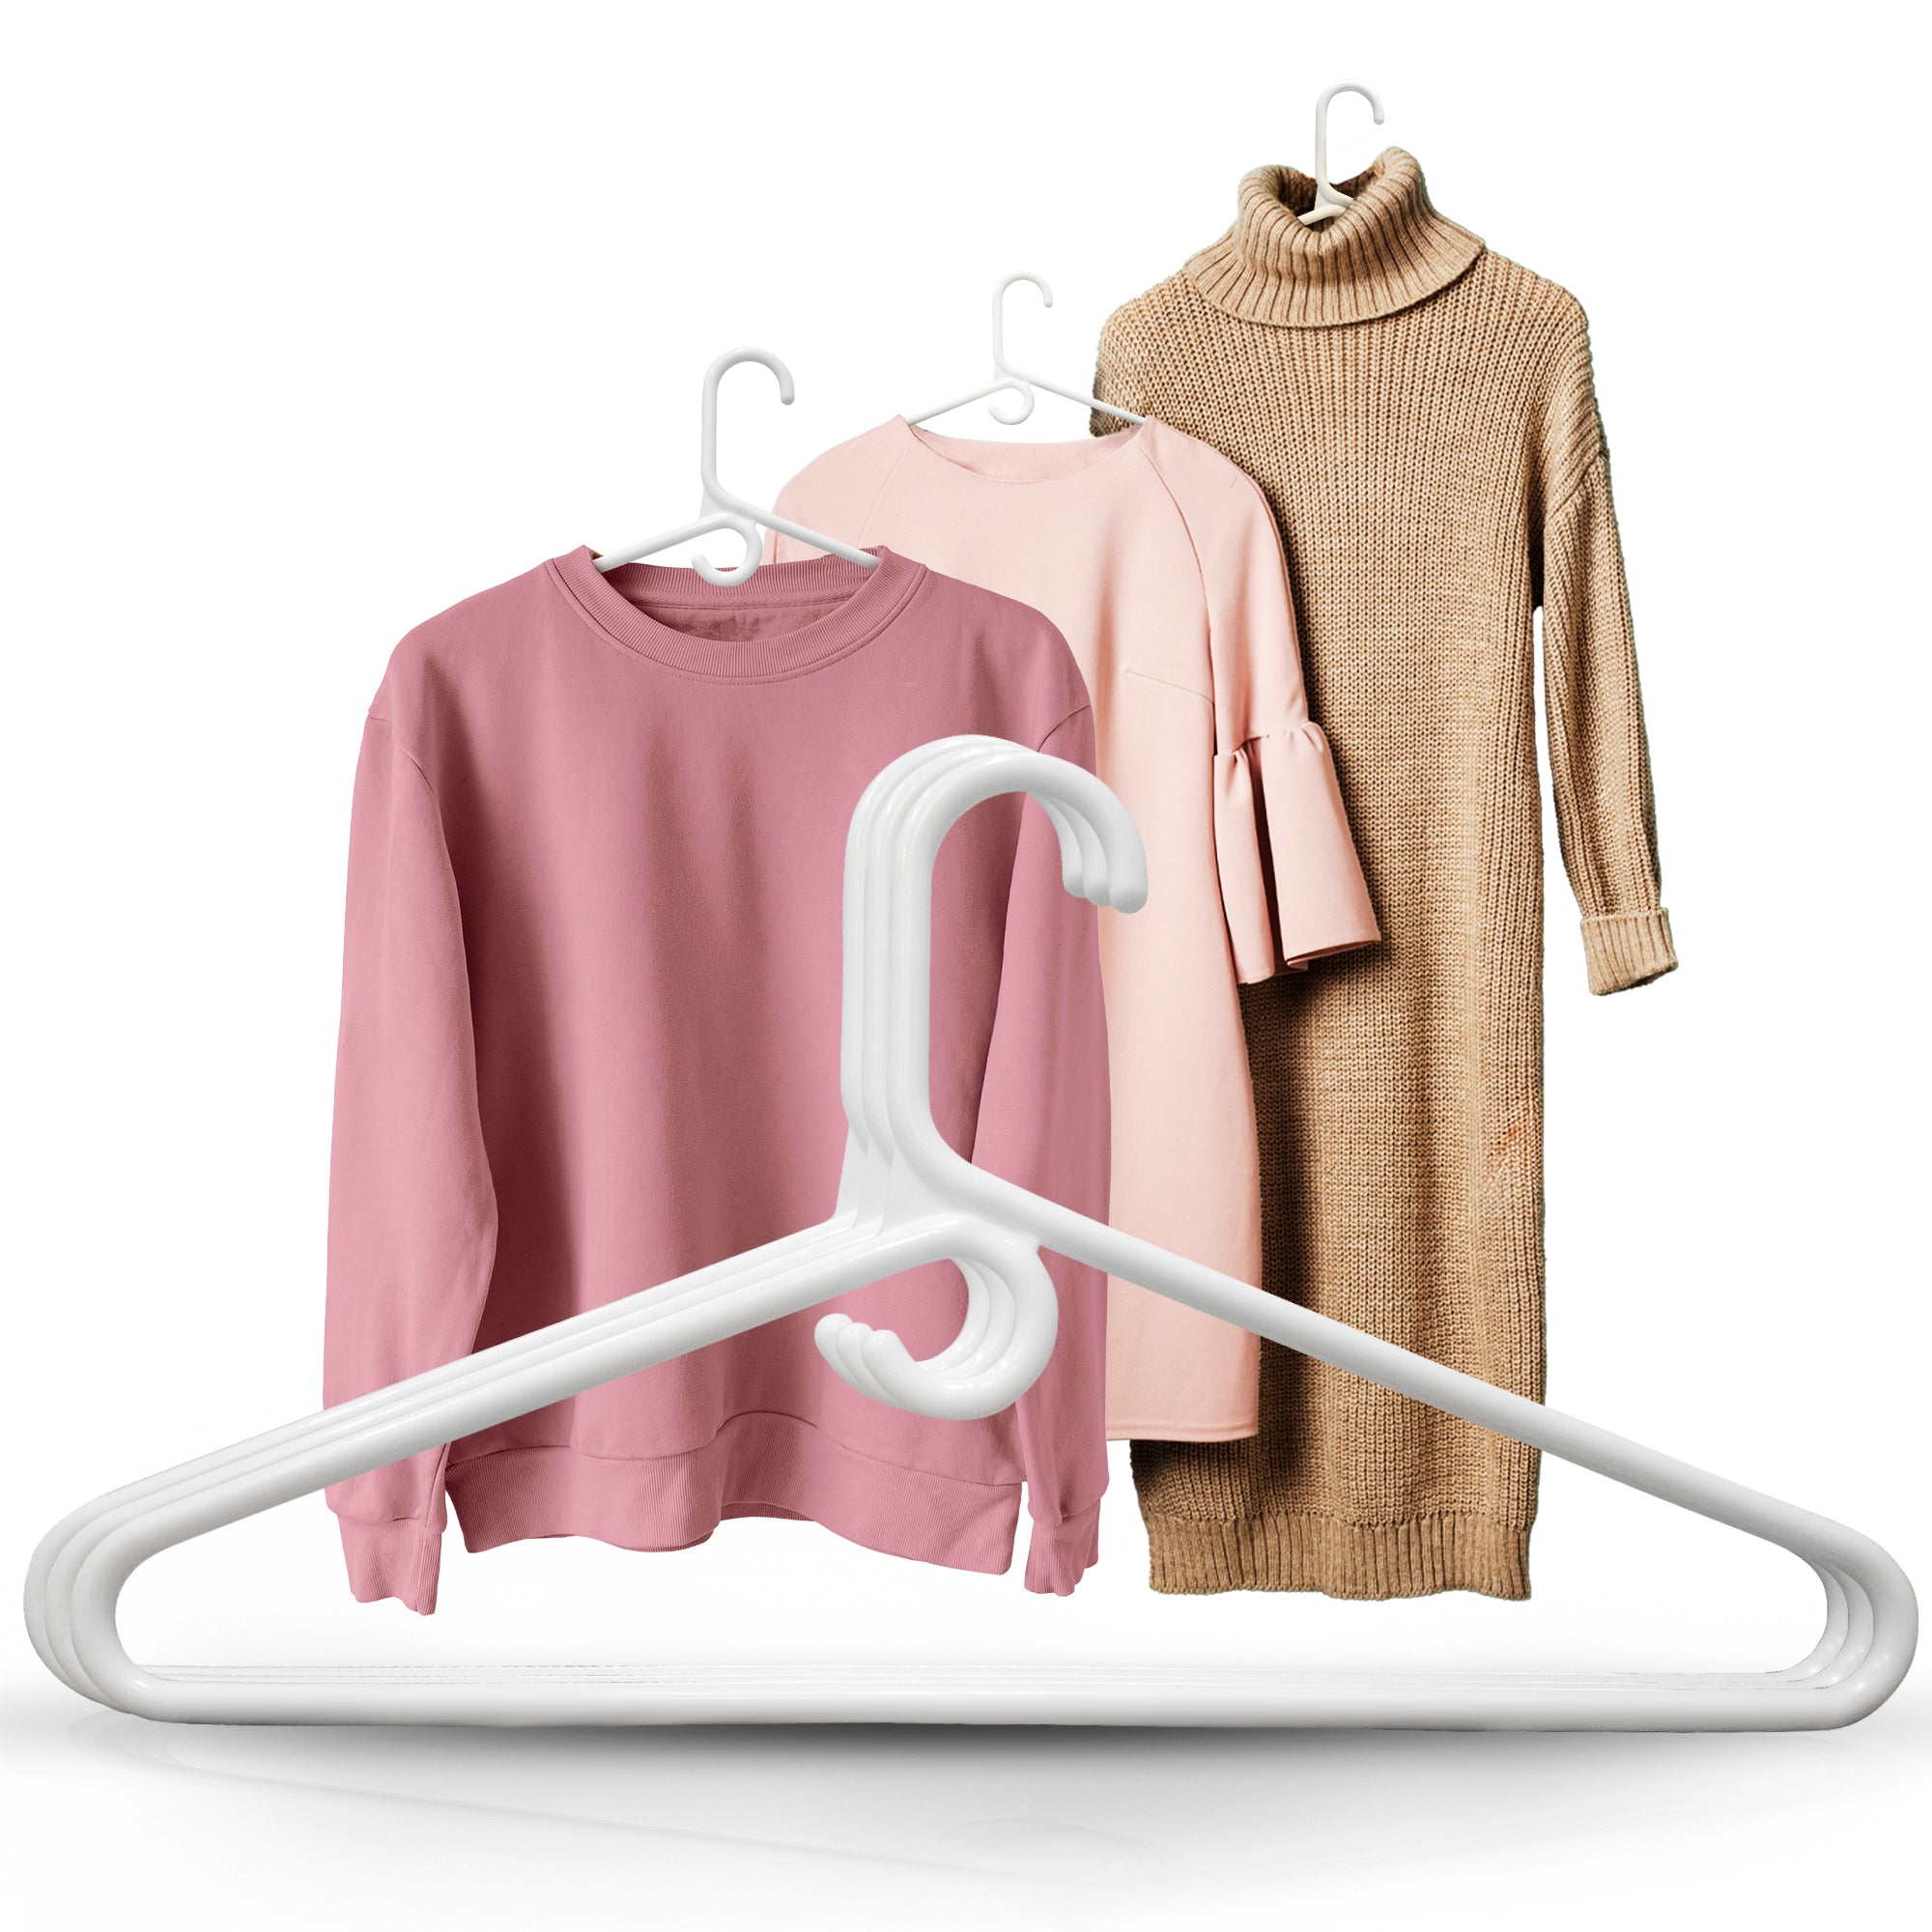 DEILSY™ White Plastic Hangers - Super Heavy Duty Clothes Hanger, Thick Strong Standard Closet Plastic Hangers with Hook for Scarves and Belts - Pack of 10 White Hangers